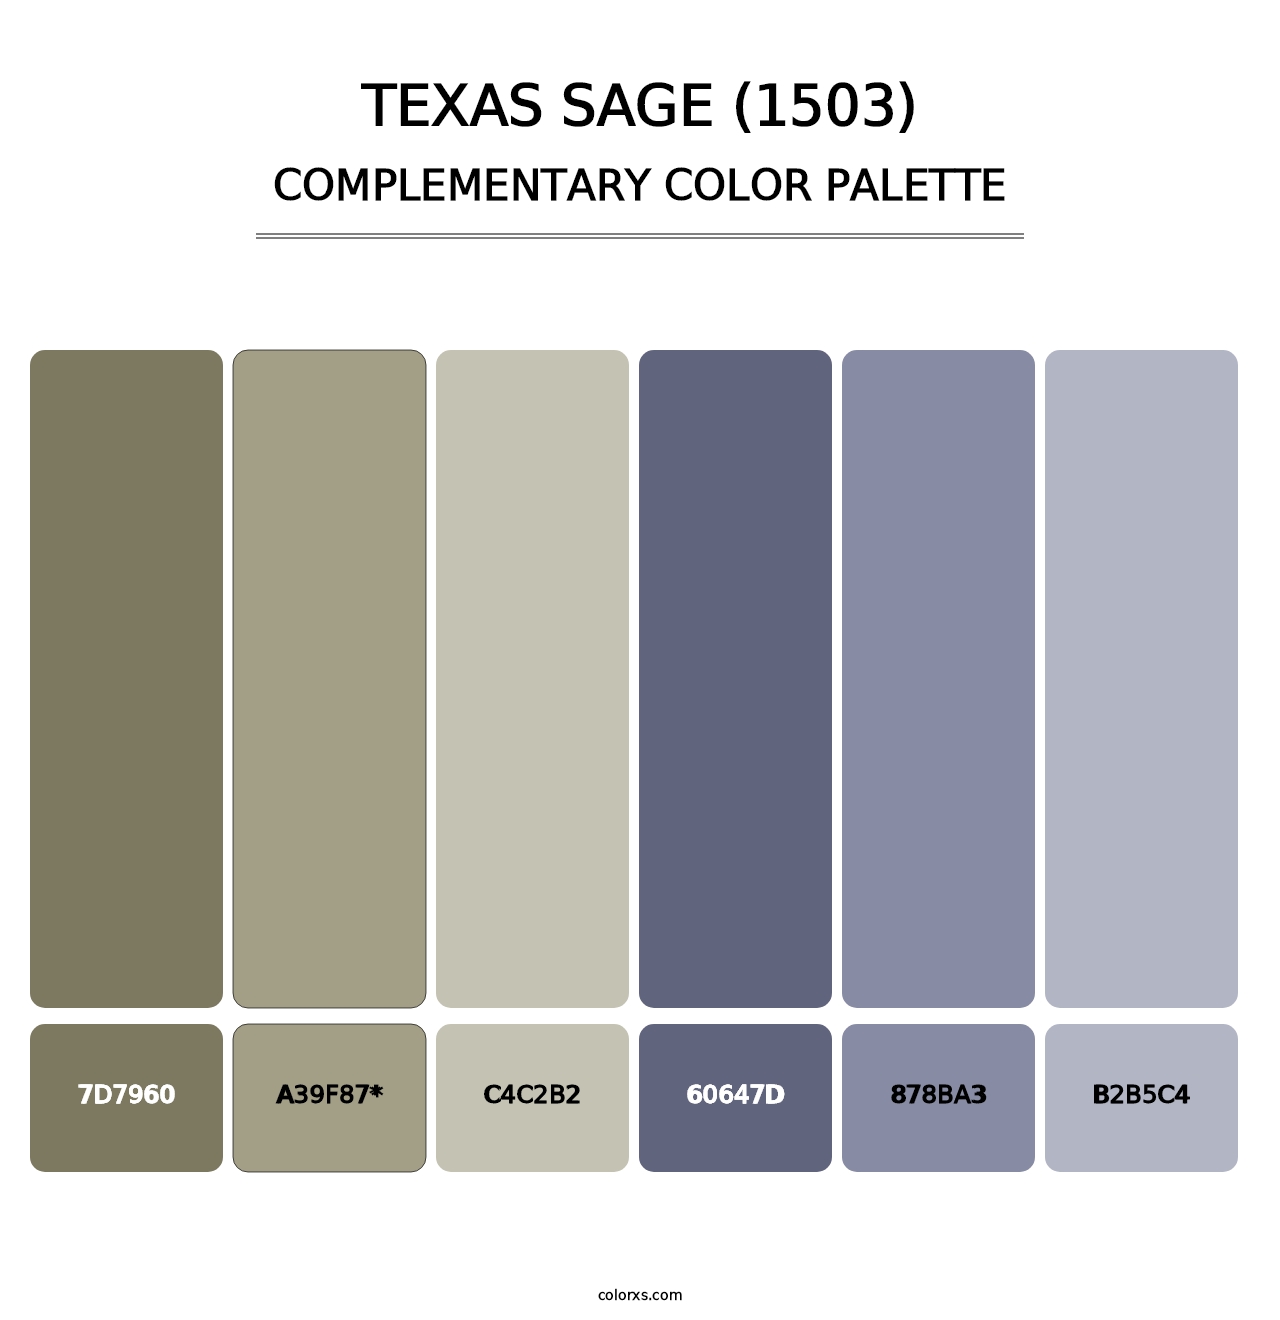 Texas Sage (1503) - Complementary Color Palette